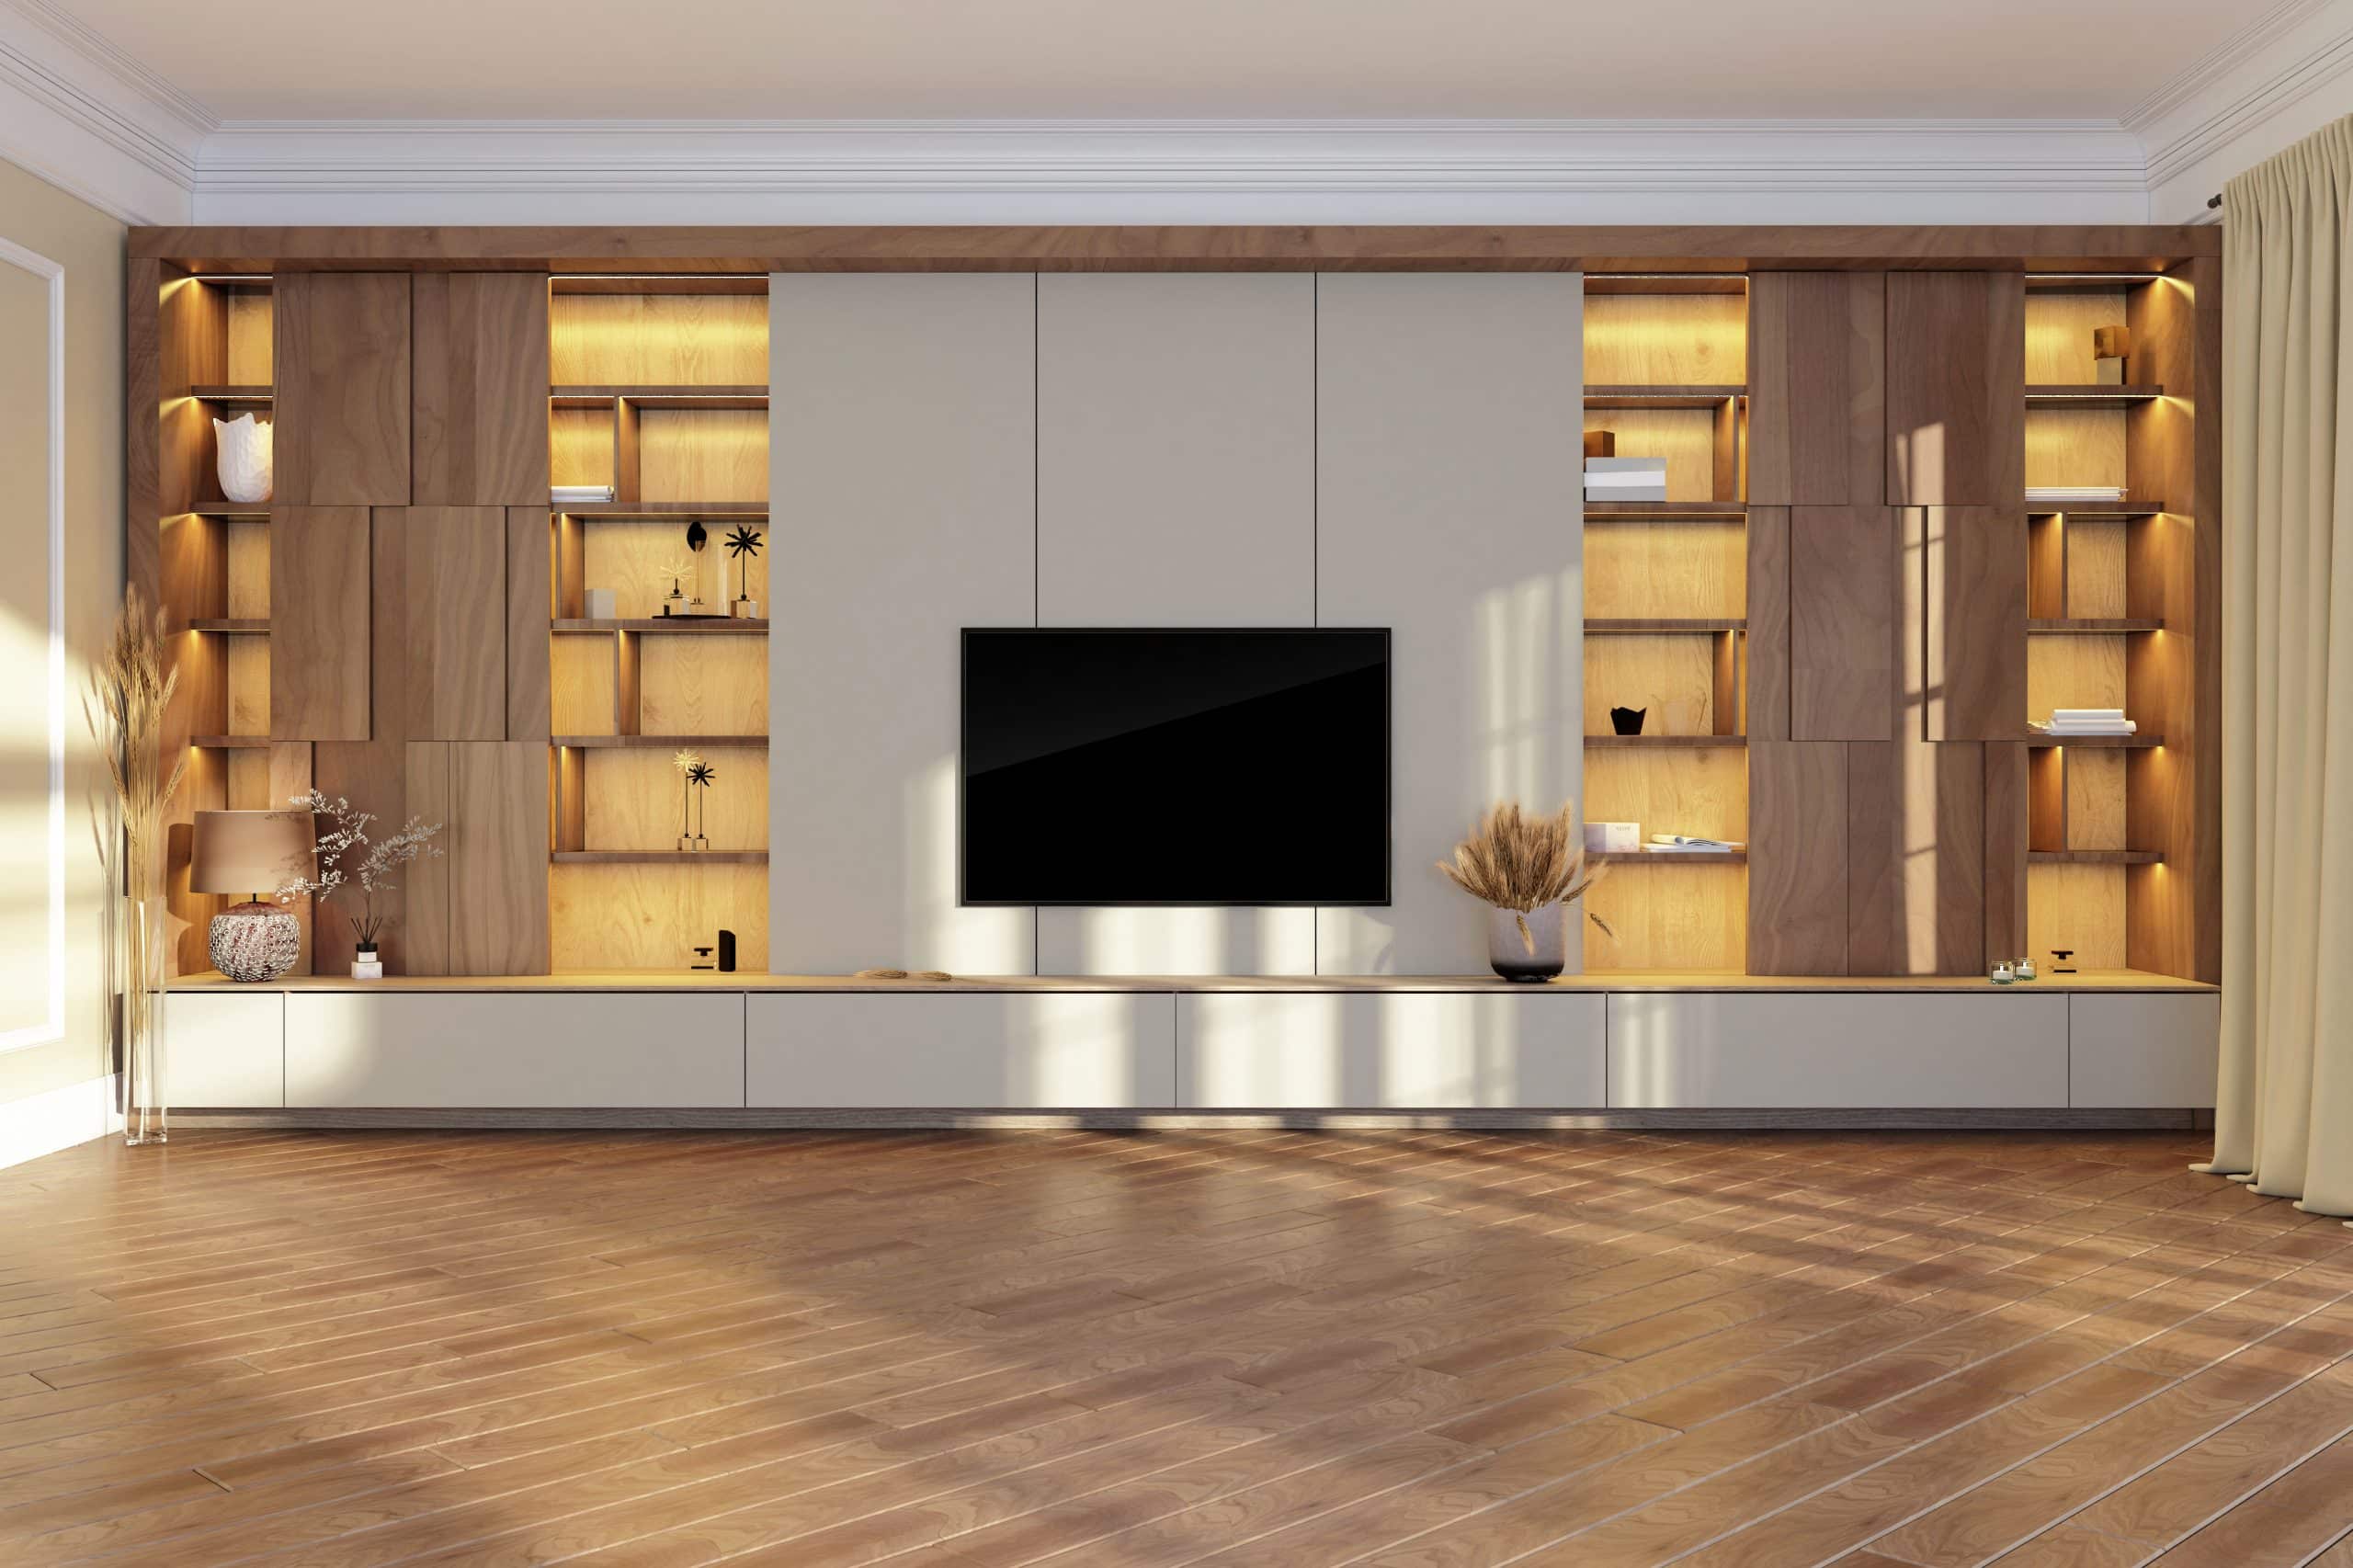 TV unit in living room interior with black TV on the wall. Illuminated shelves. 3d render